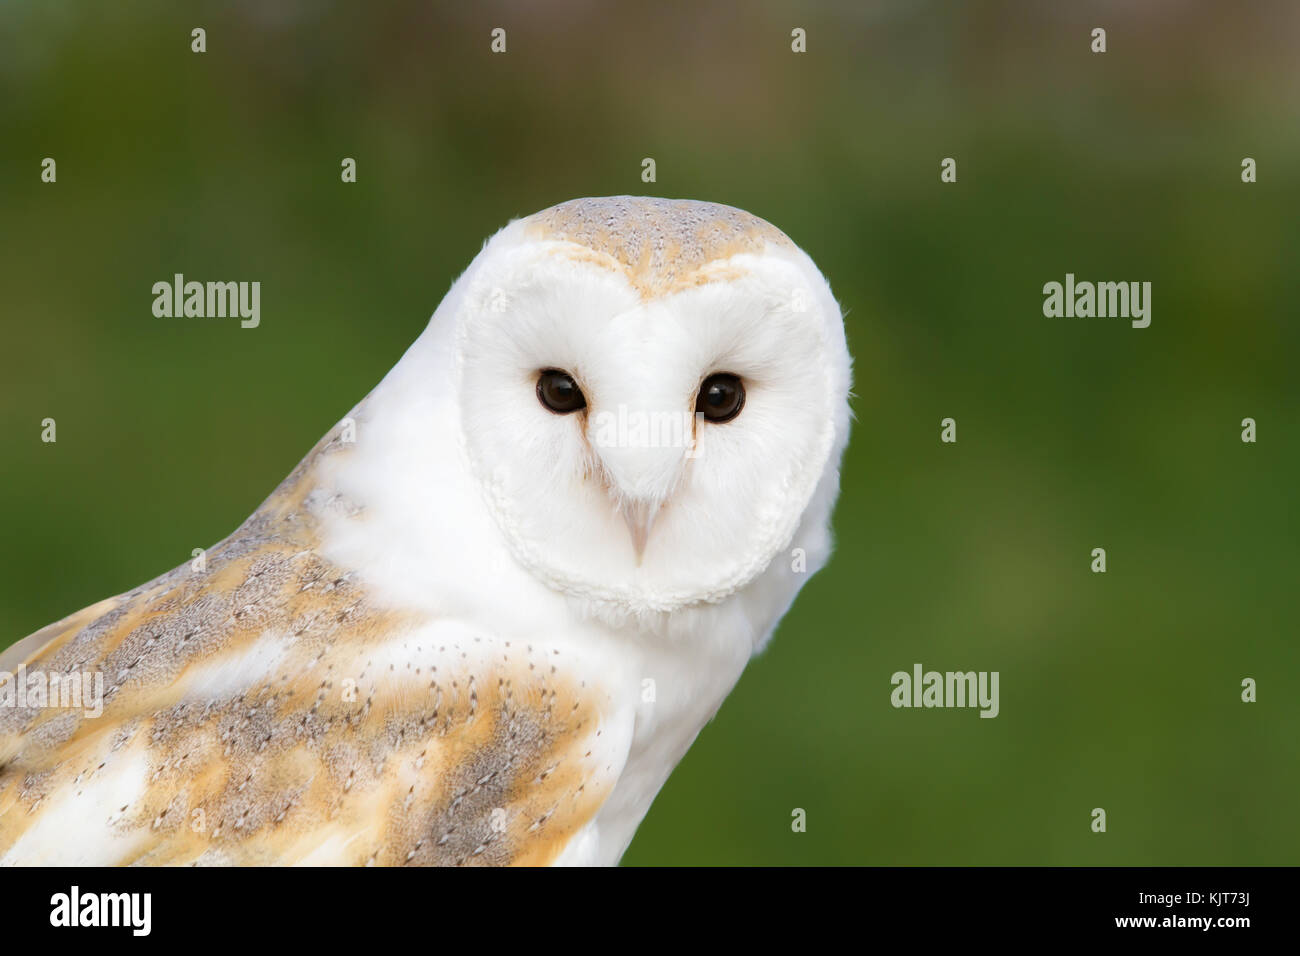 Close up of a barn owl against green background Stock Photo